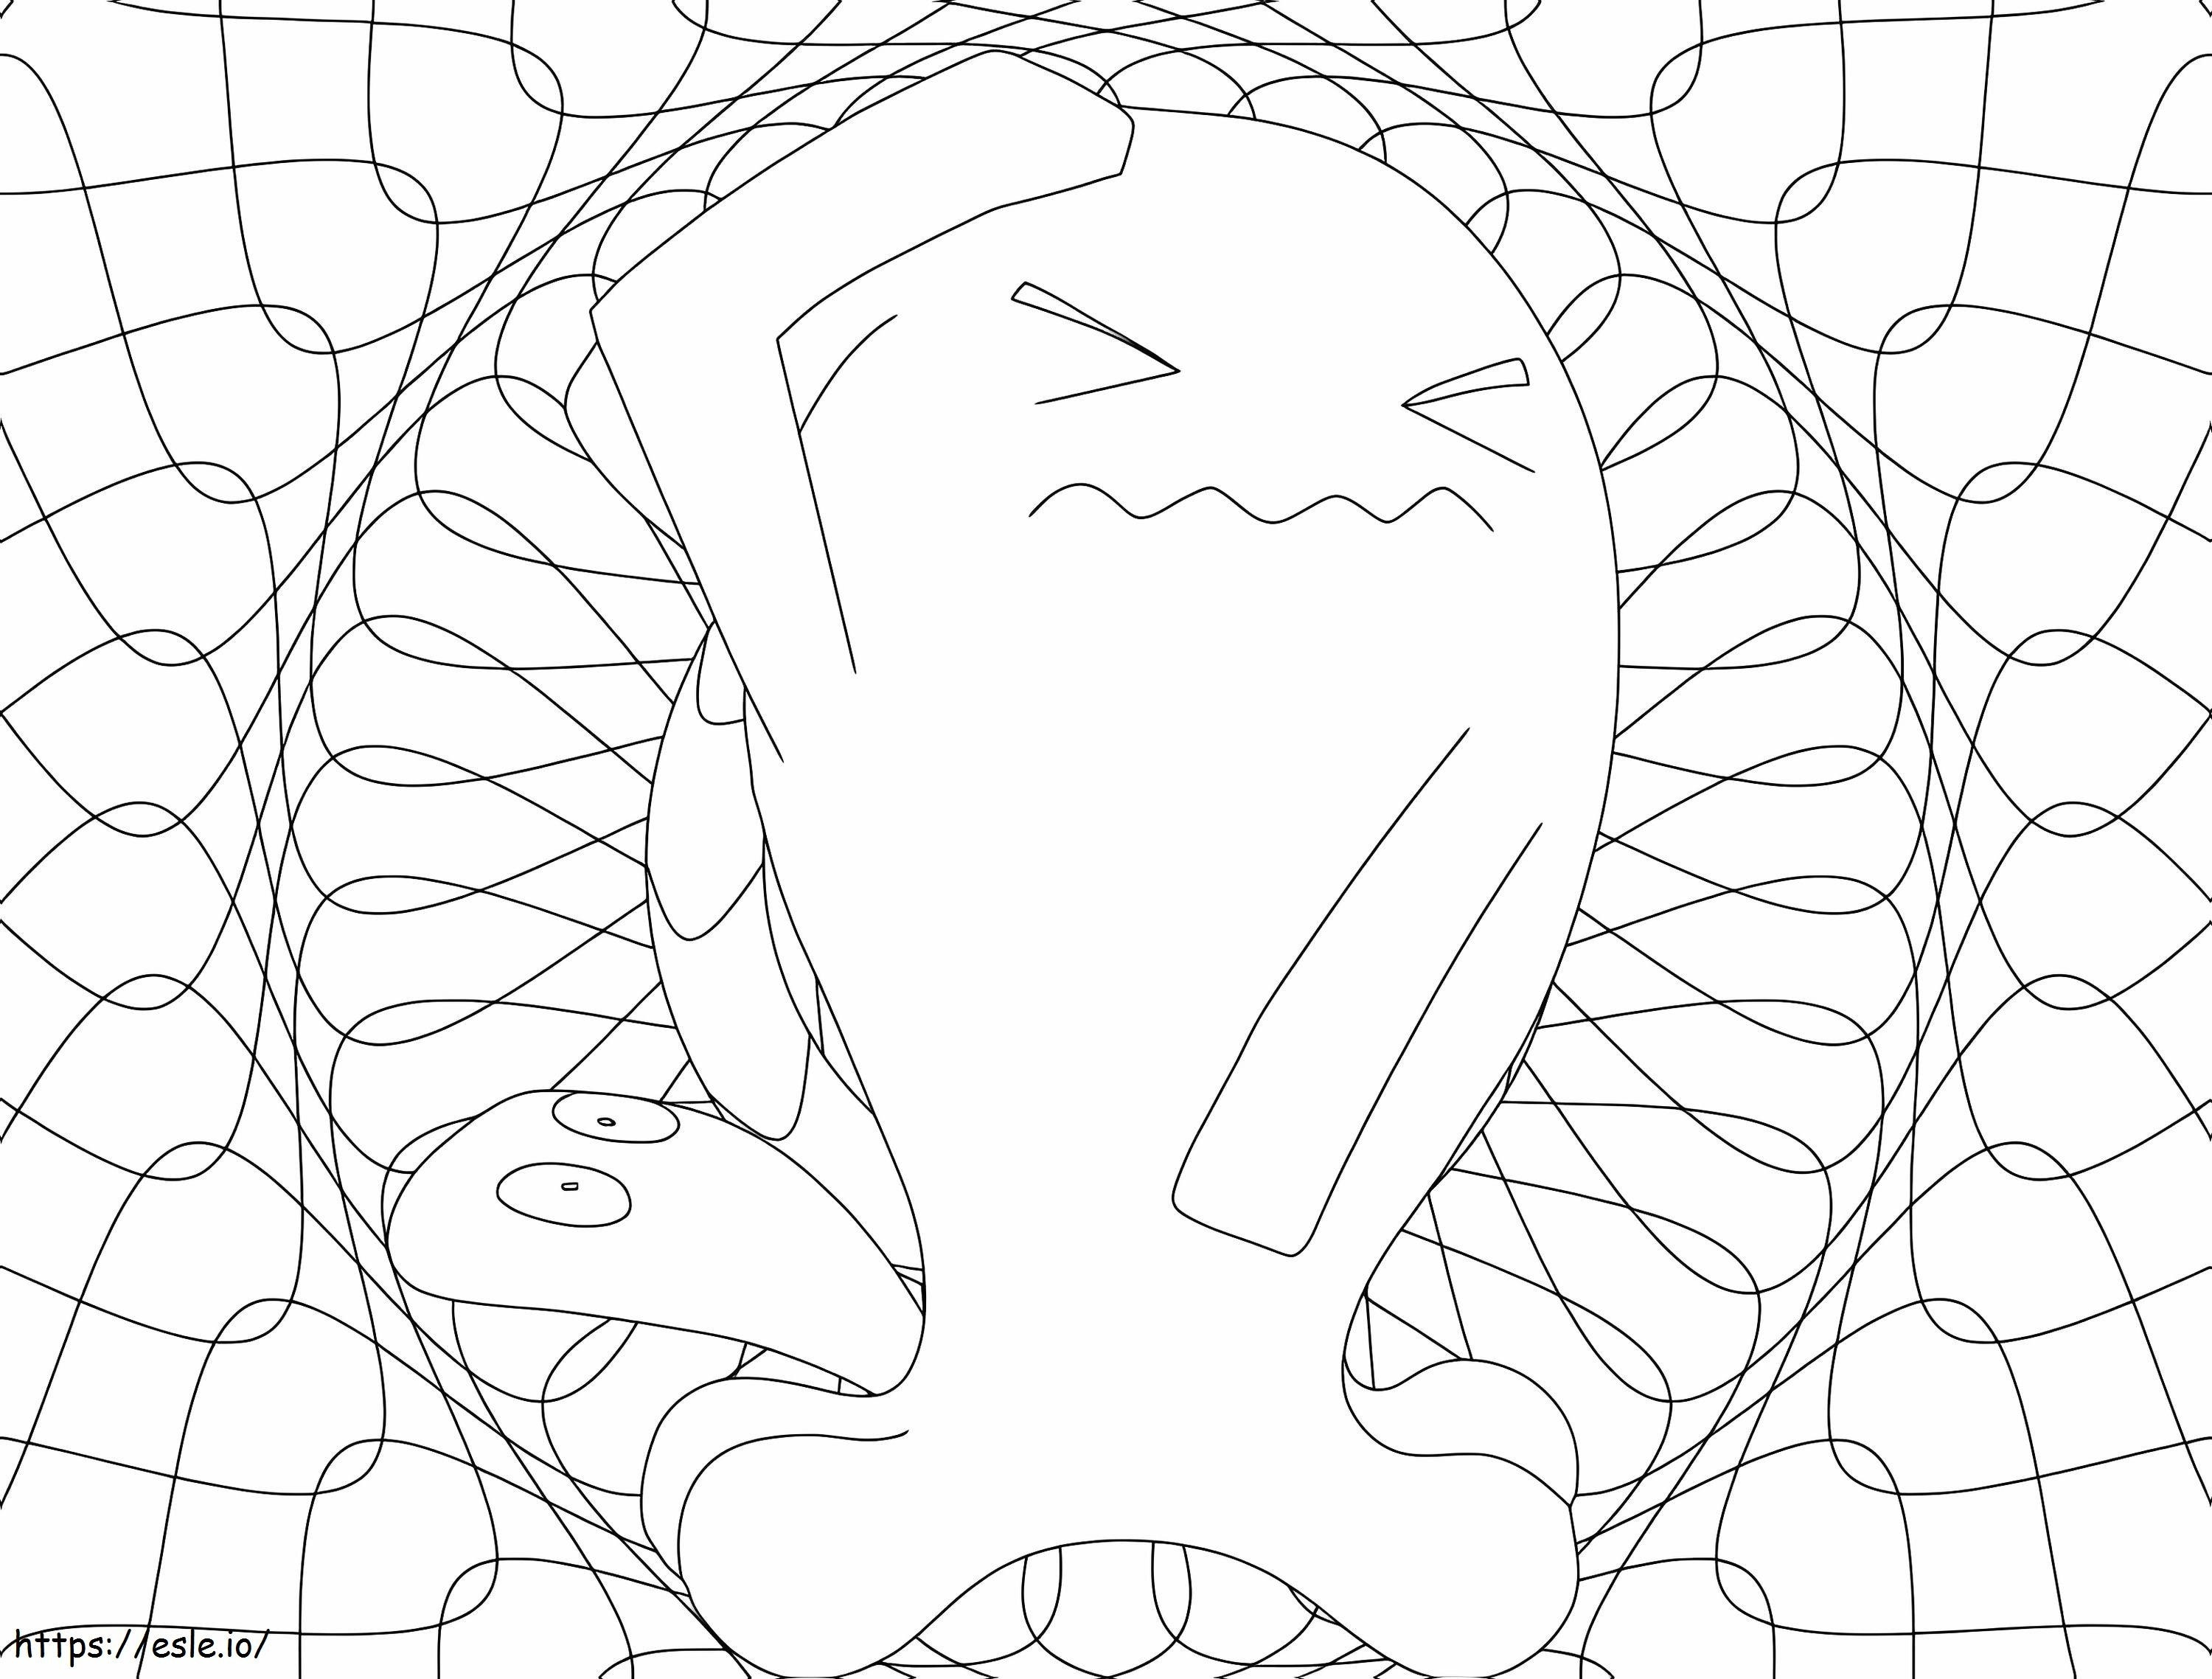 Wobbuffet 4 coloring page